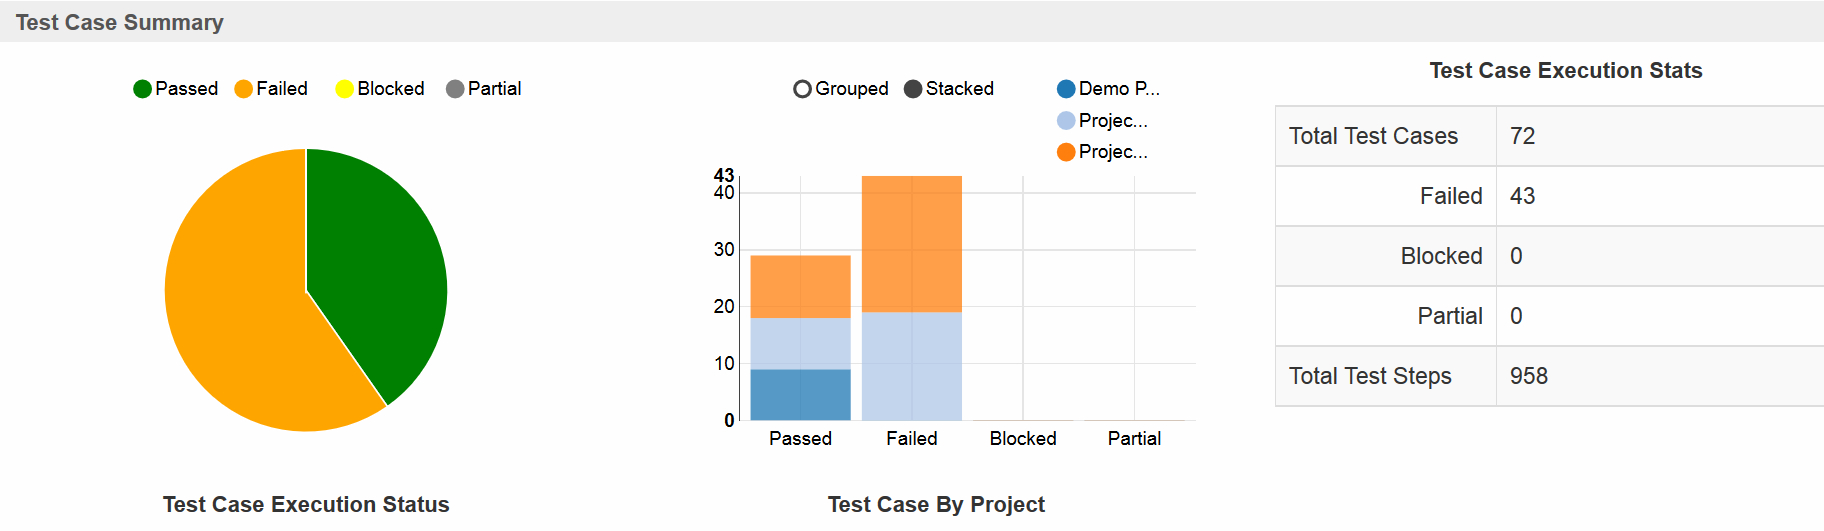 Test Case Execution Report Template ] – Visual Studio 2015 In Test Case Execution Report Template